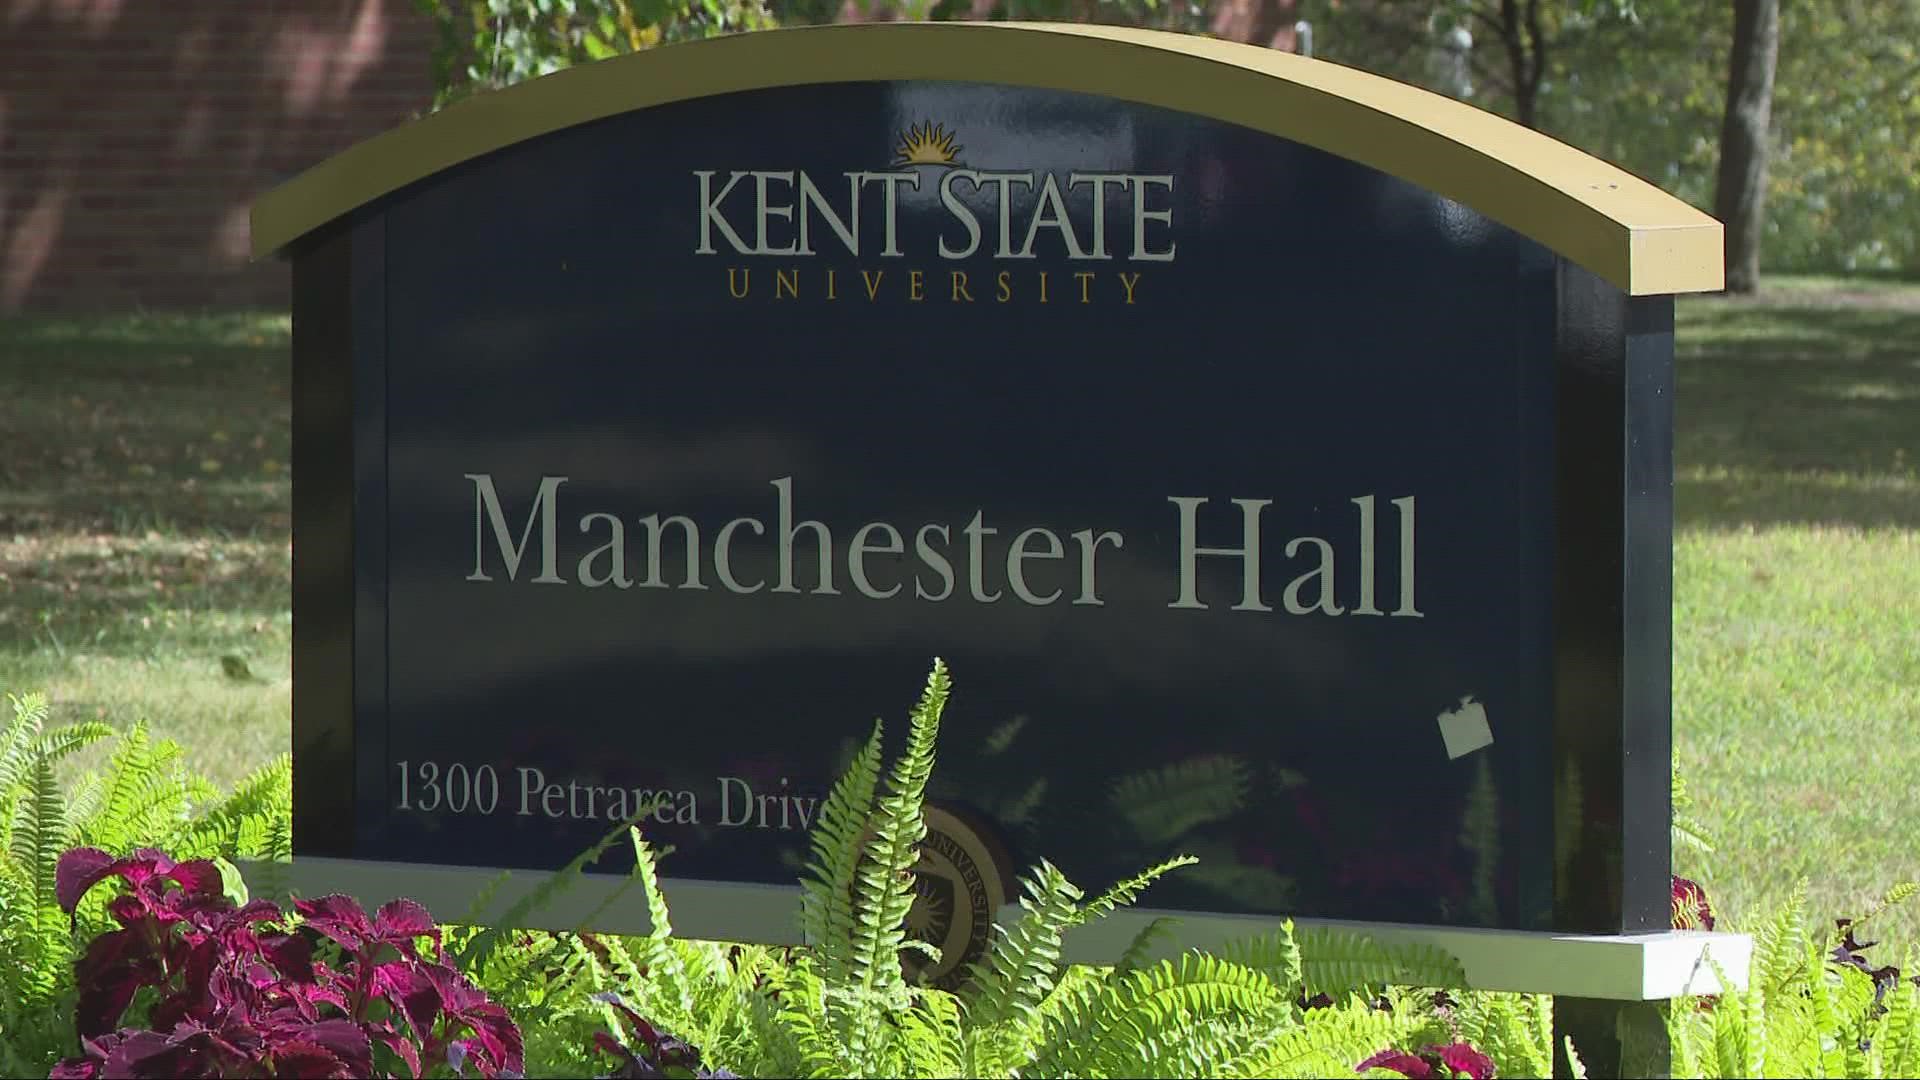 The alleged sexual assaults happened in Manchester Hall and Allyn Hall on Kent State's campus.